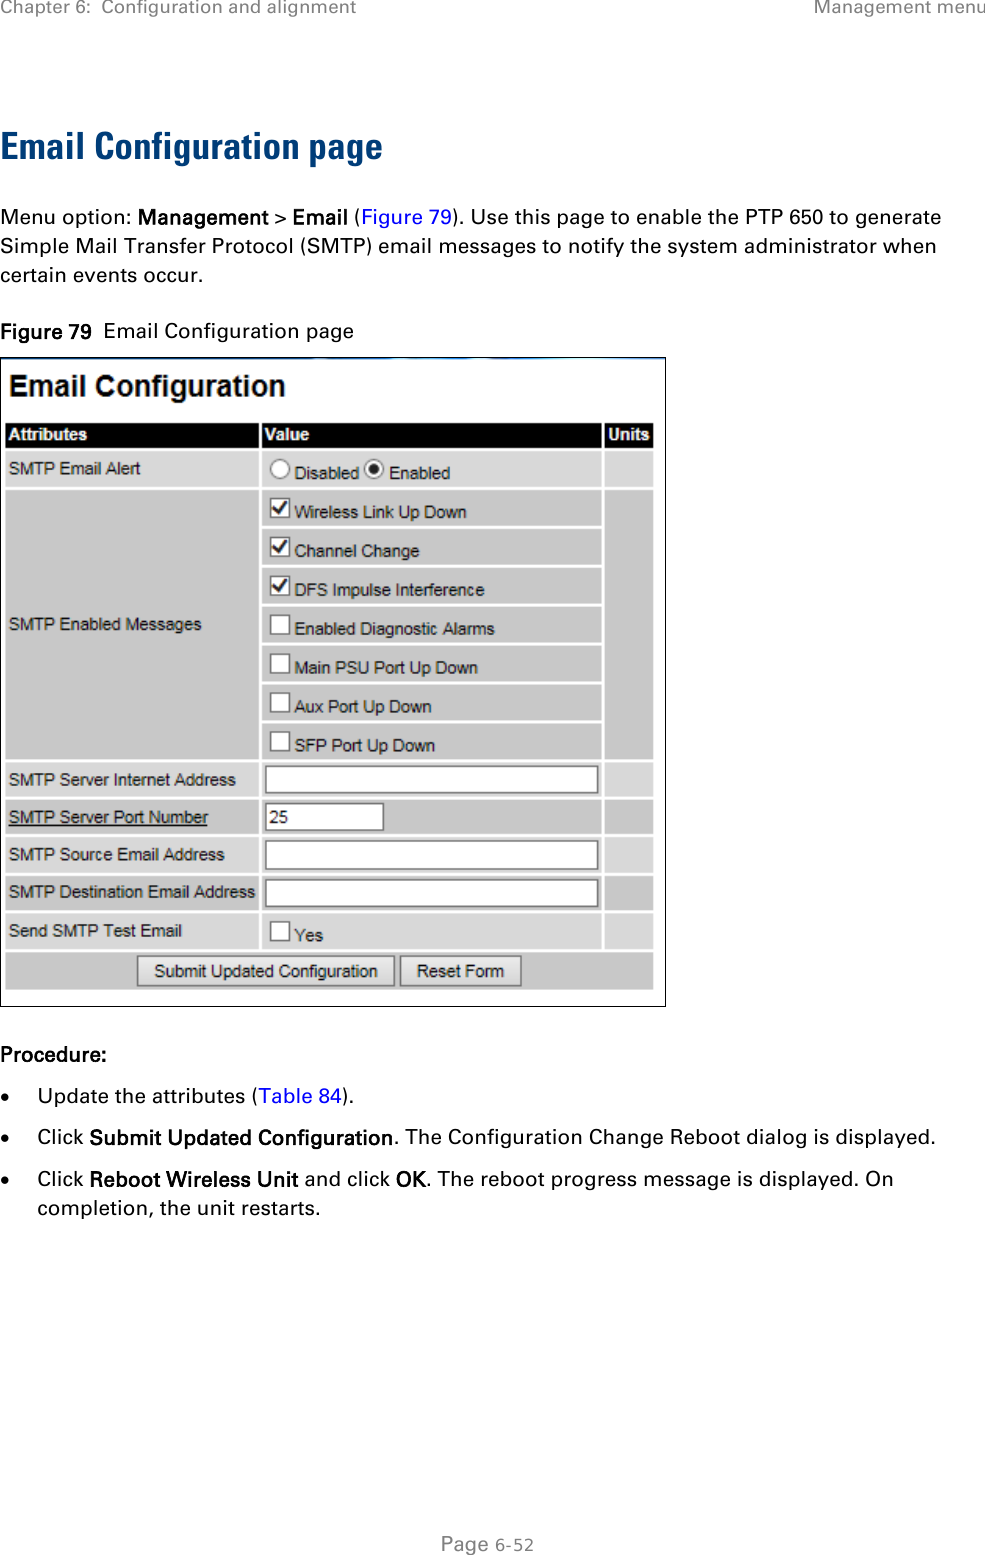 Chapter 6:  Configuration and alignment Management menu  Email Configuration page Menu option: Management &gt; Email (Figure 79). Use this page to enable the PTP 650 to generate Simple Mail Transfer Protocol (SMTP) email messages to notify the system administrator when certain events occur. Figure 79  Email Configuration page  Procedure: • Update the attributes (Table 84). • Click Submit Updated Configuration. The Configuration Change Reboot dialog is displayed. • Click Reboot Wireless Unit and click OK. The reboot progress message is displayed. On completion, the unit restarts.  Page 6-52 